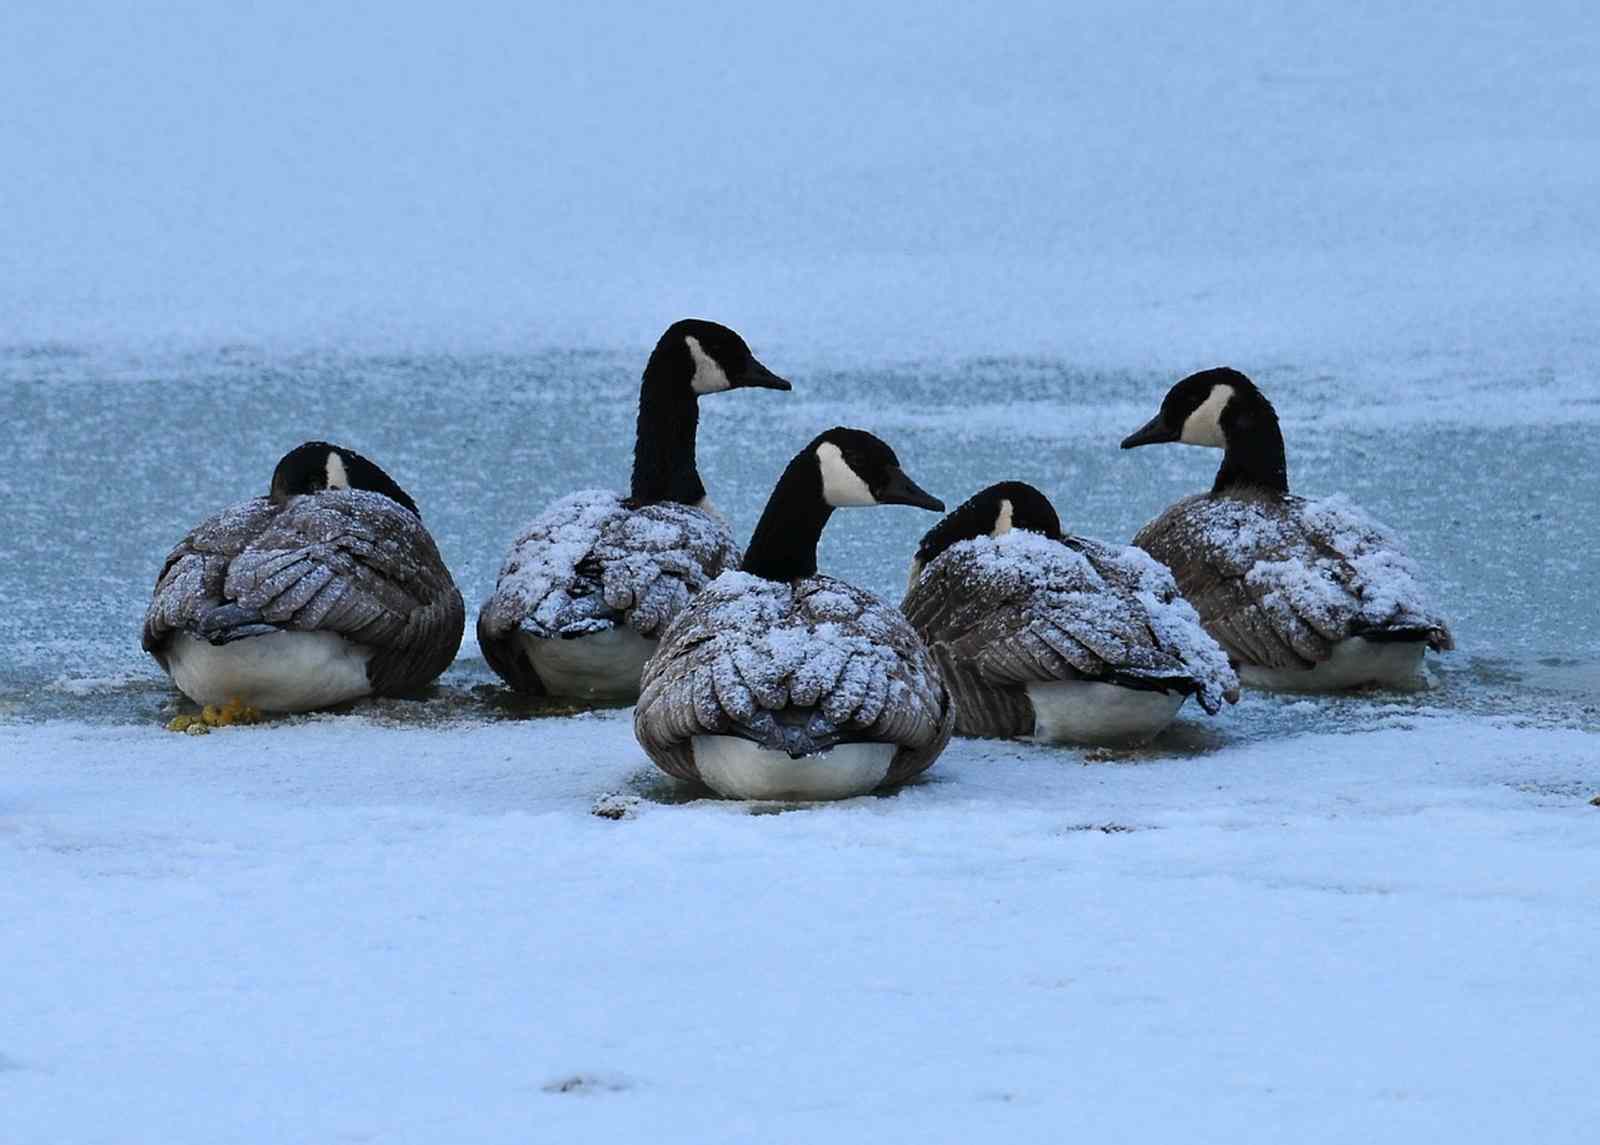 Snow-covered Canada geese huddle together in a snow storm